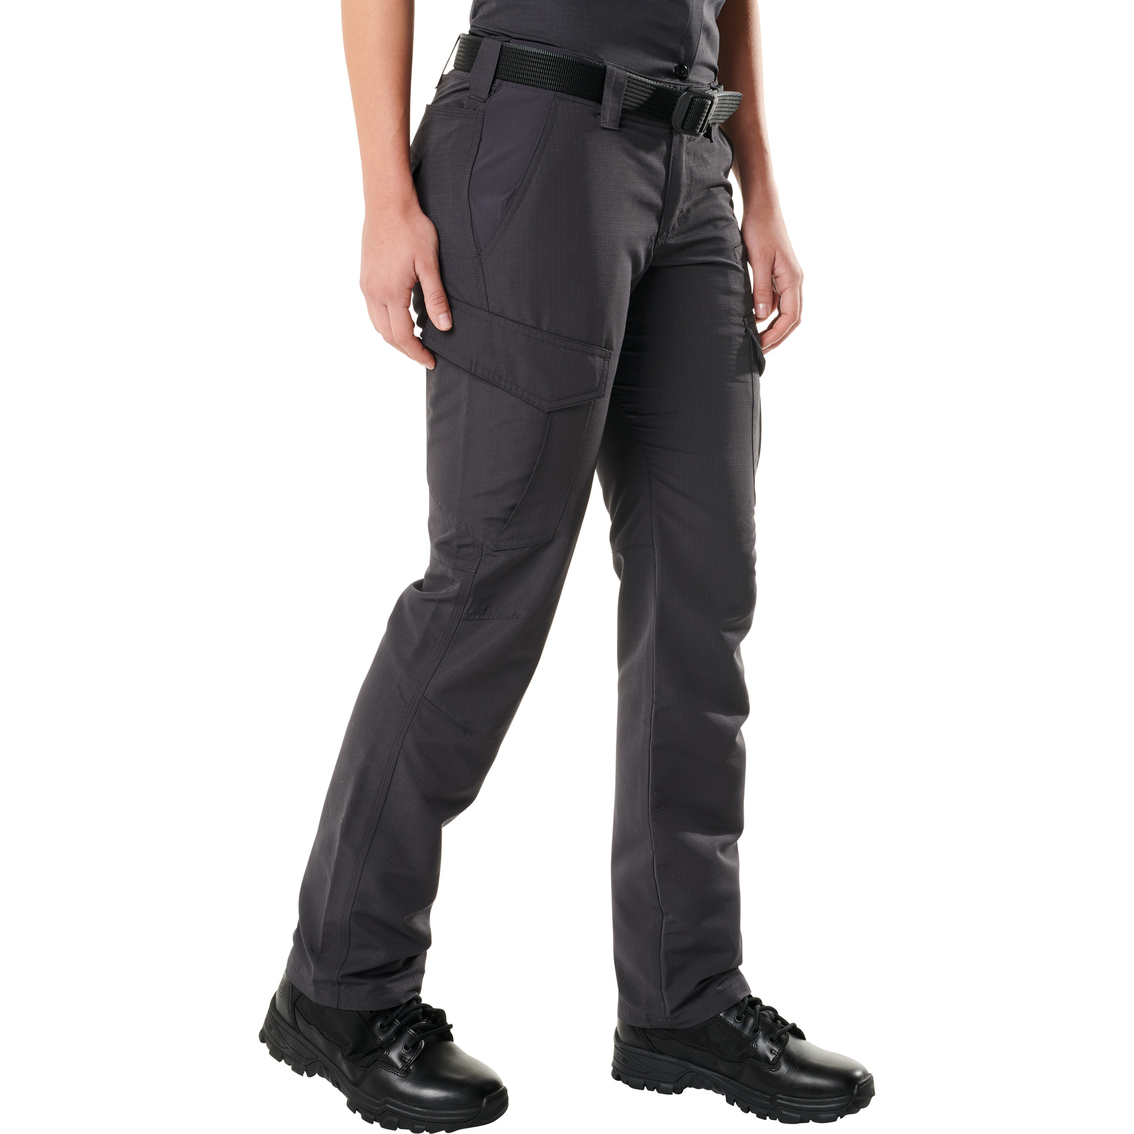 5.11 Women's Fast Tac Cargo Pants - Image 3 of 3